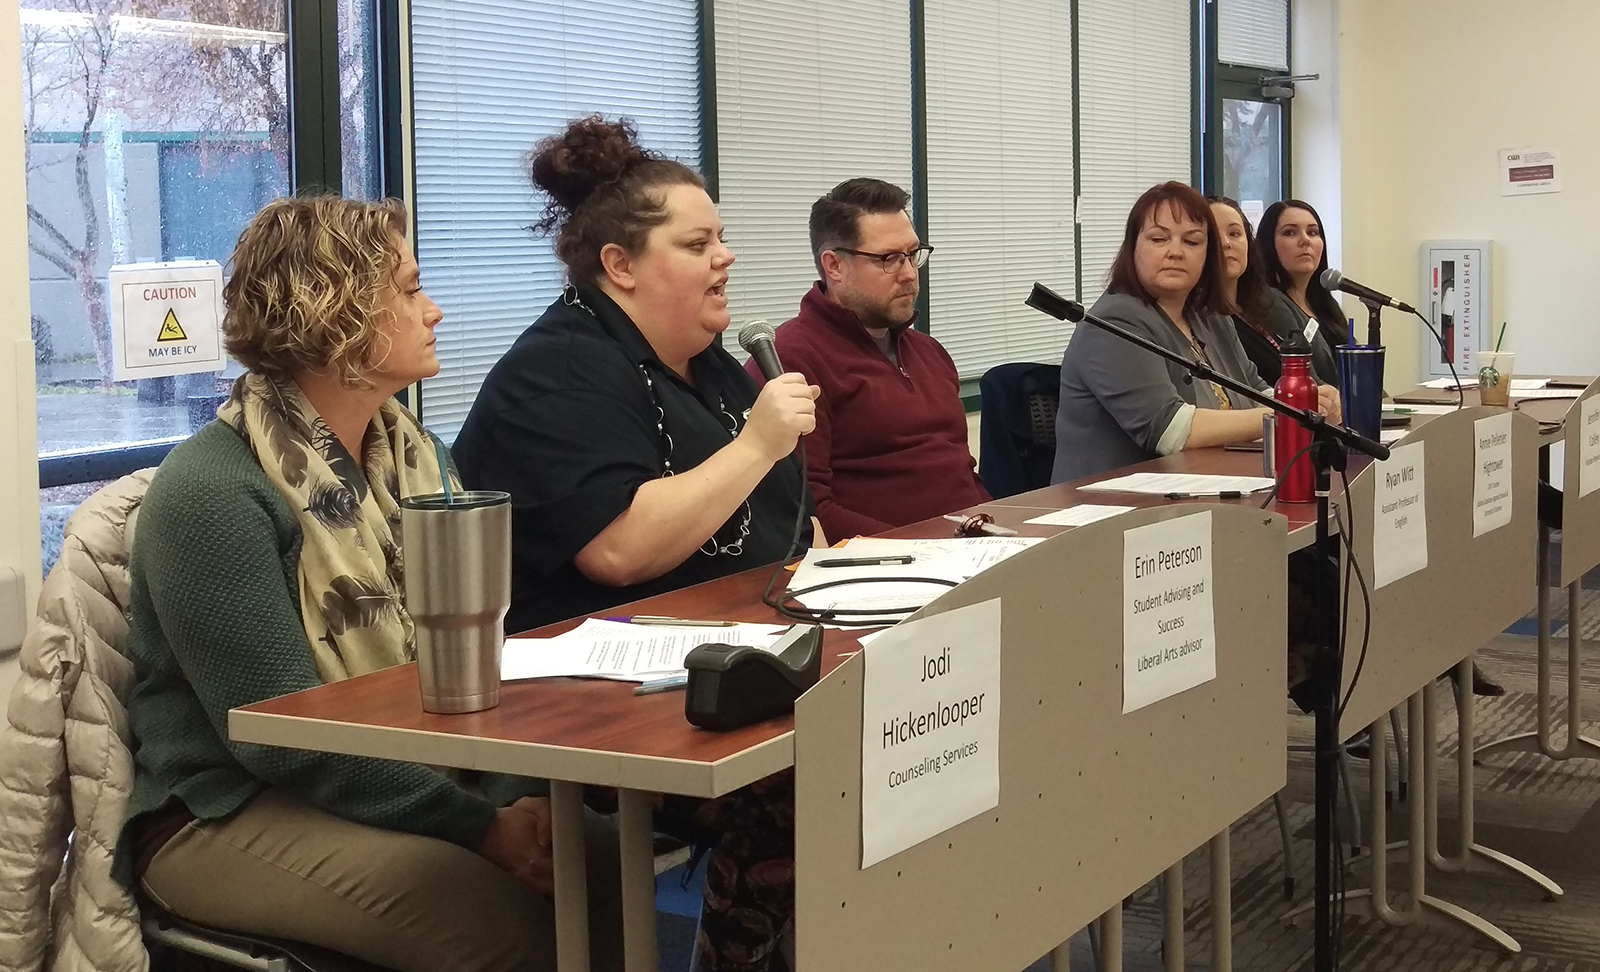 Panel discussion during Common Read event on Feb. 13.